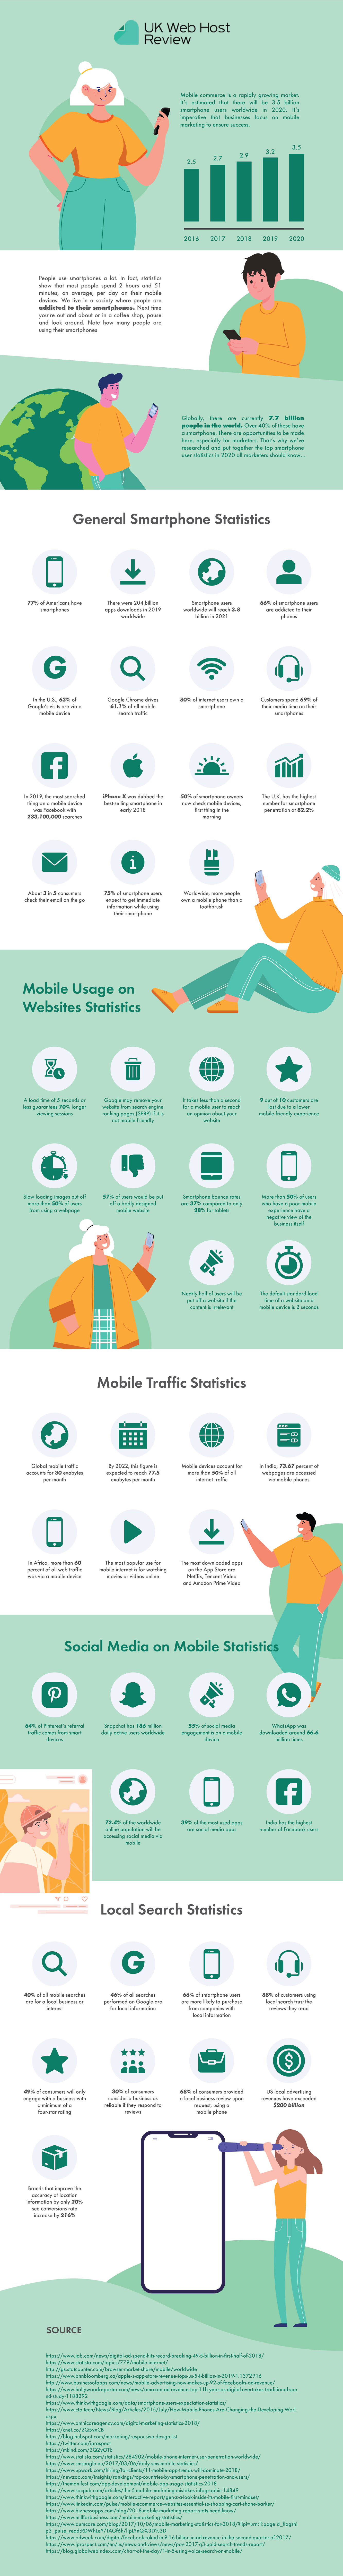 Smartphone user statistics in 2020 [INFOGRAPHIC] - An infographic from UKWebHostReview